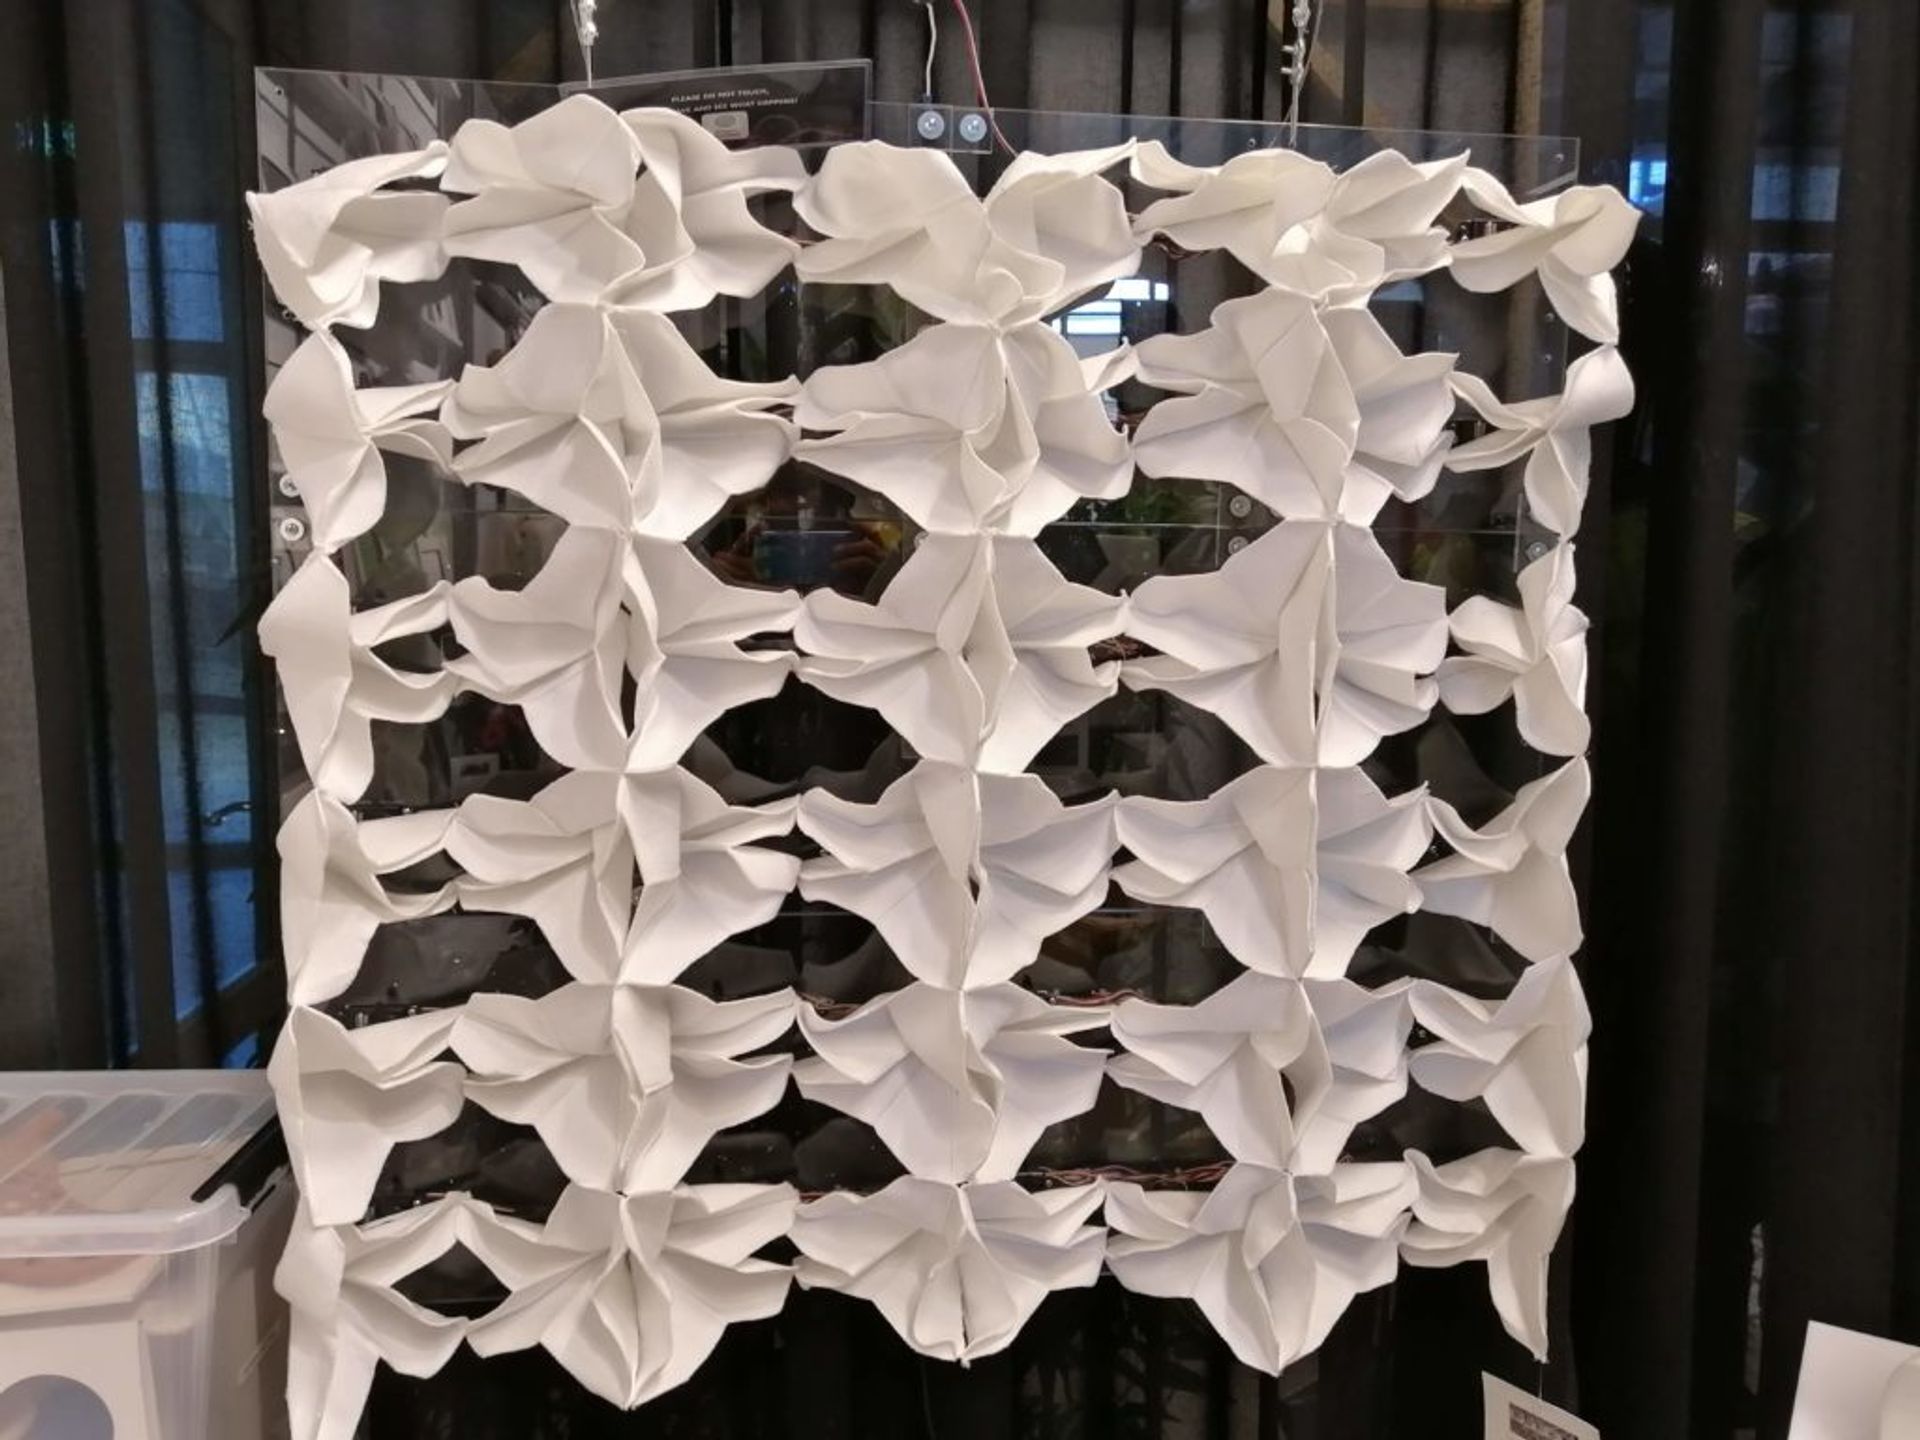 White, knitted textiles attaching to a plastic board.